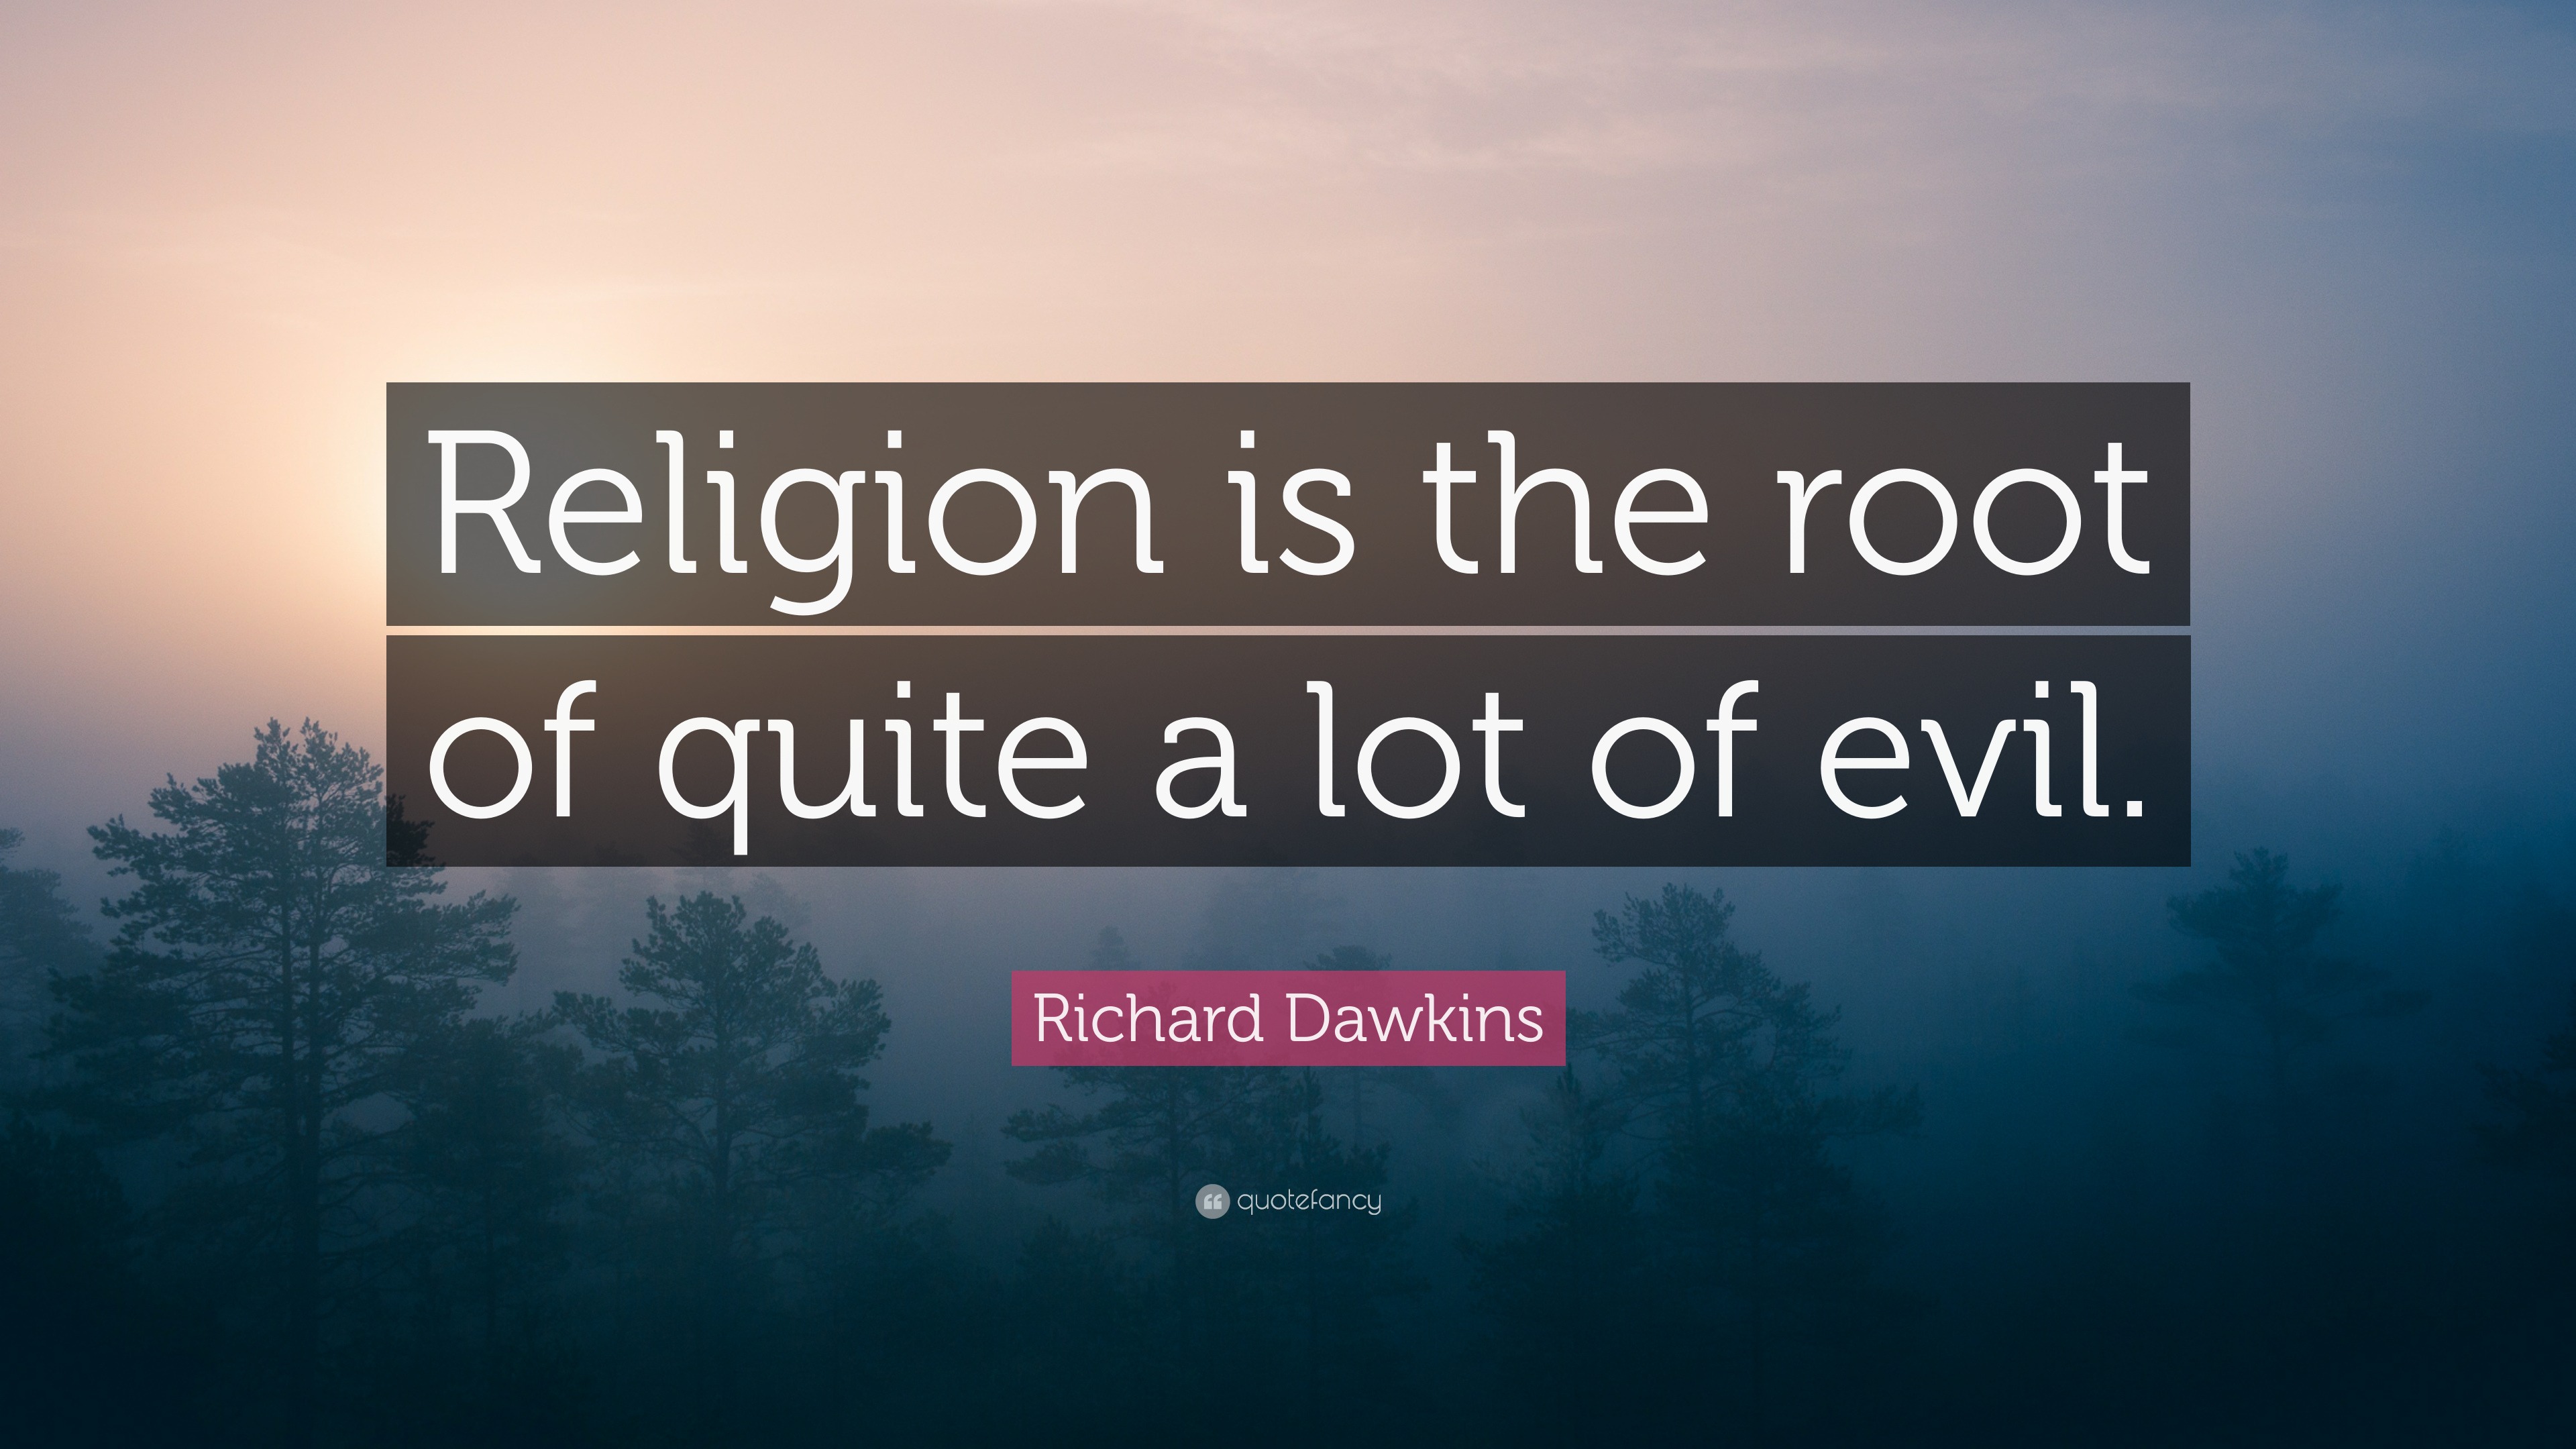 Richard Dawkins Quote: “Religion is the root of quite a lot of evil.”